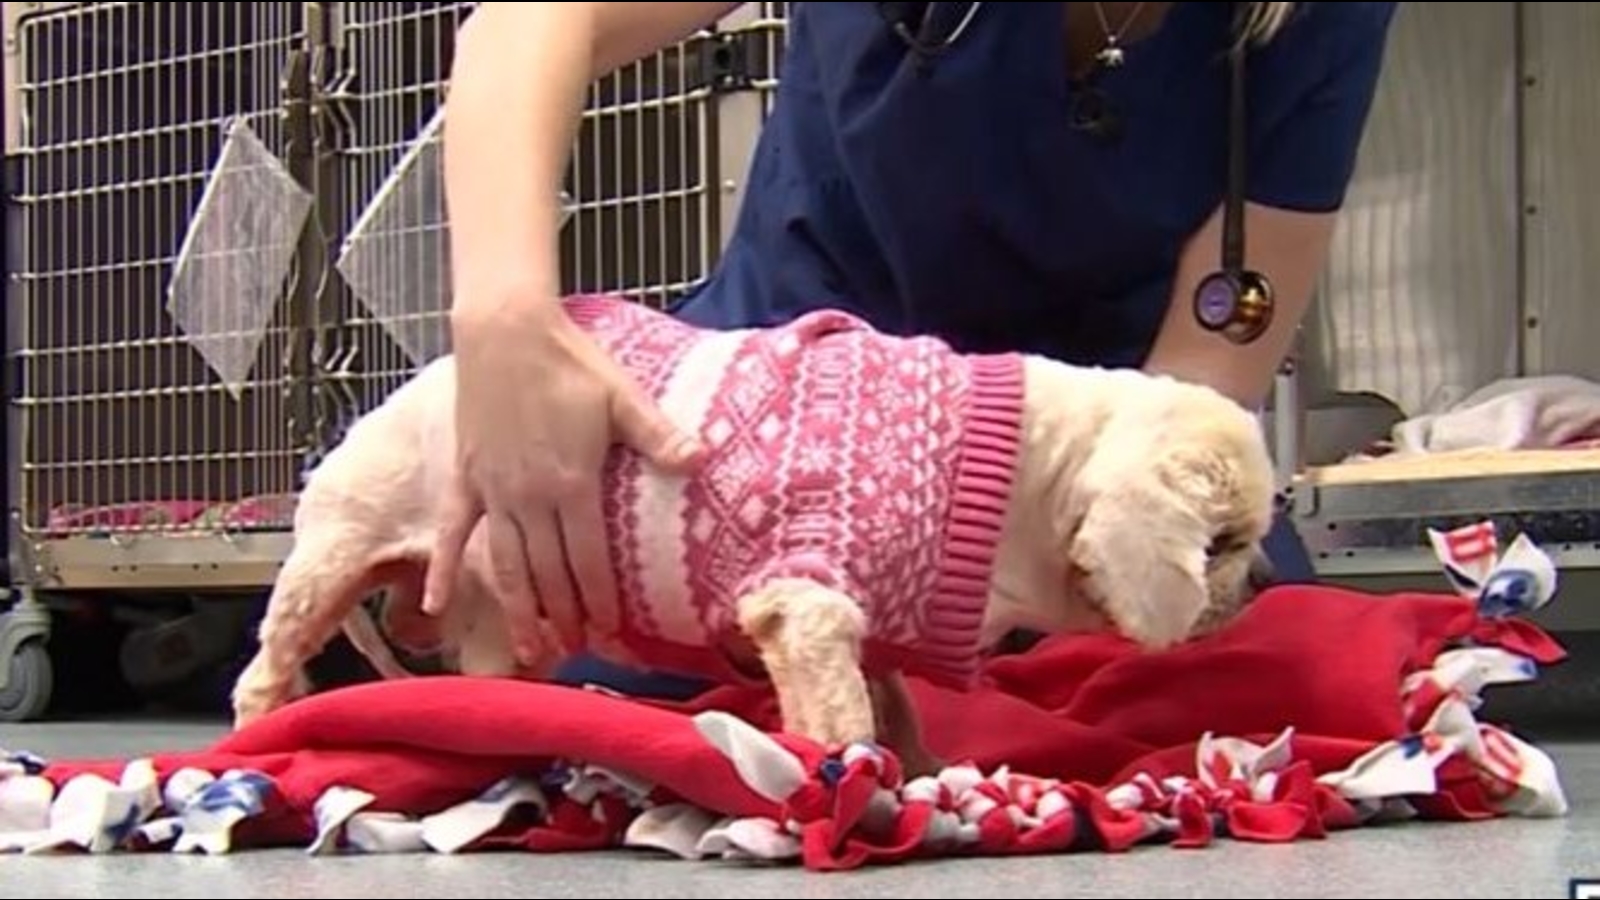 Dog rescued: Pekingese mix recovering at Florida animal rescue after found stuck to sidewalk